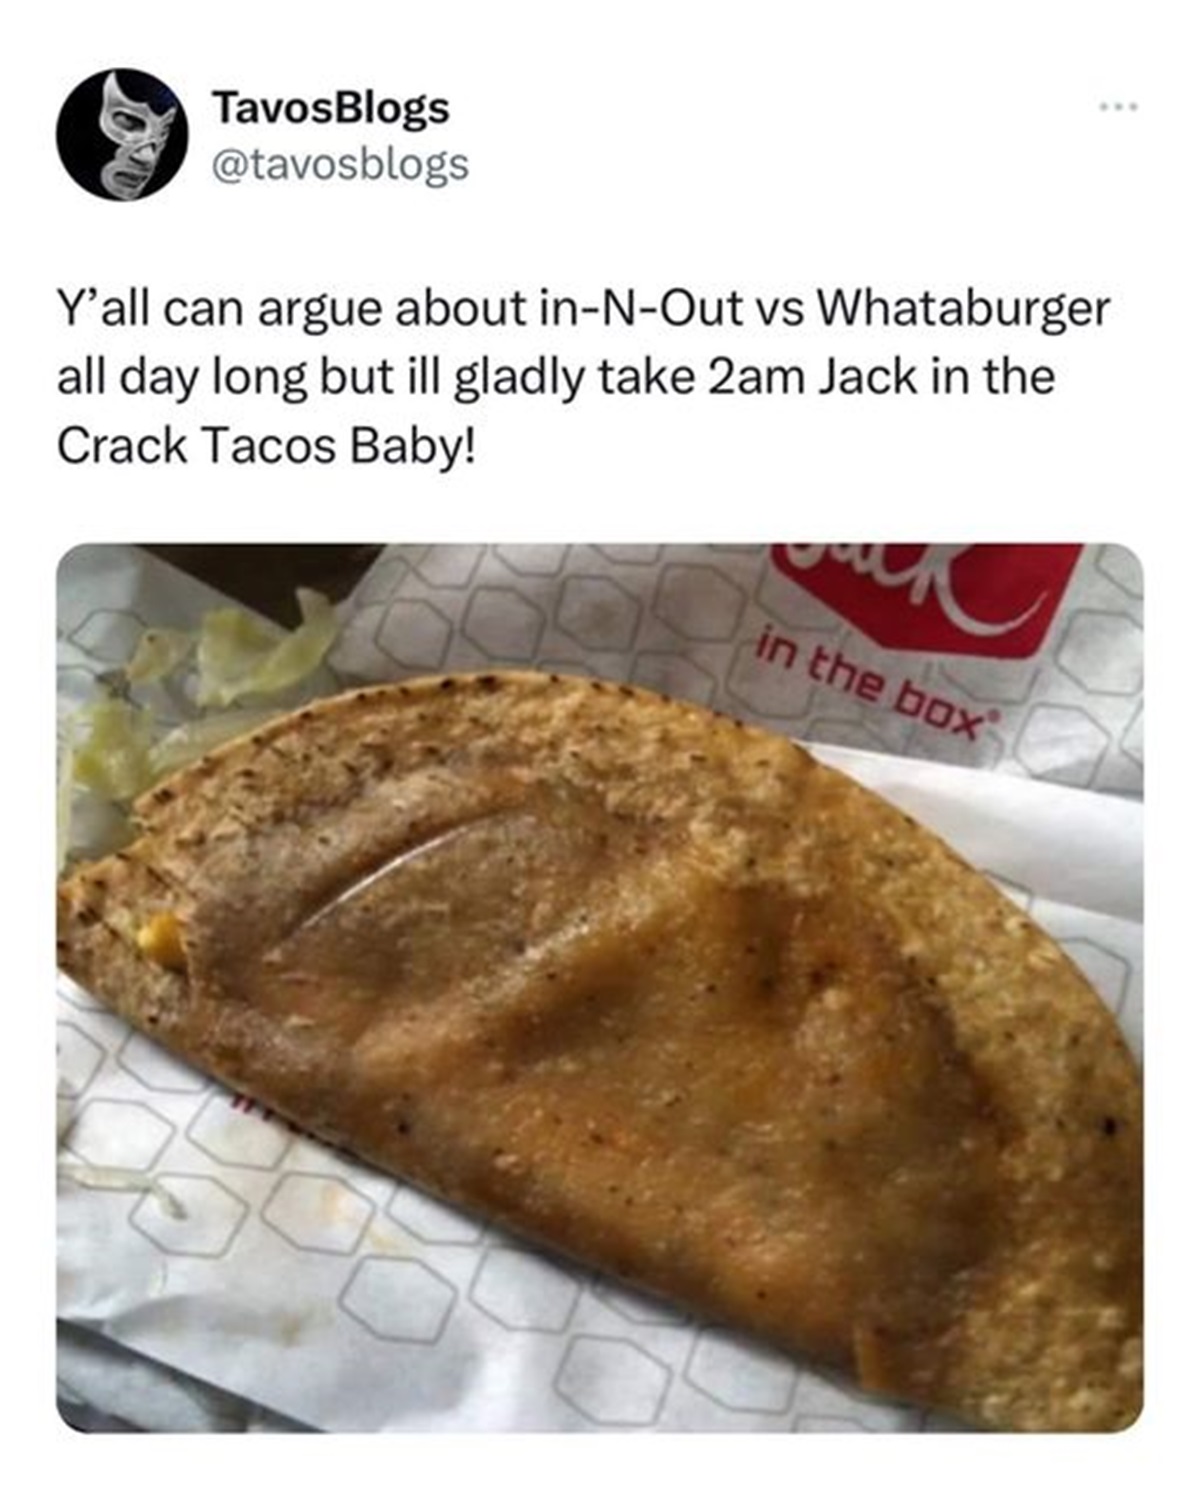 banana bread - TavosBlogs Y'all can argue about inNOut vs Whataburger all day long but ill gladly take 2am Jack in the Crack Tacos Baby! in the box